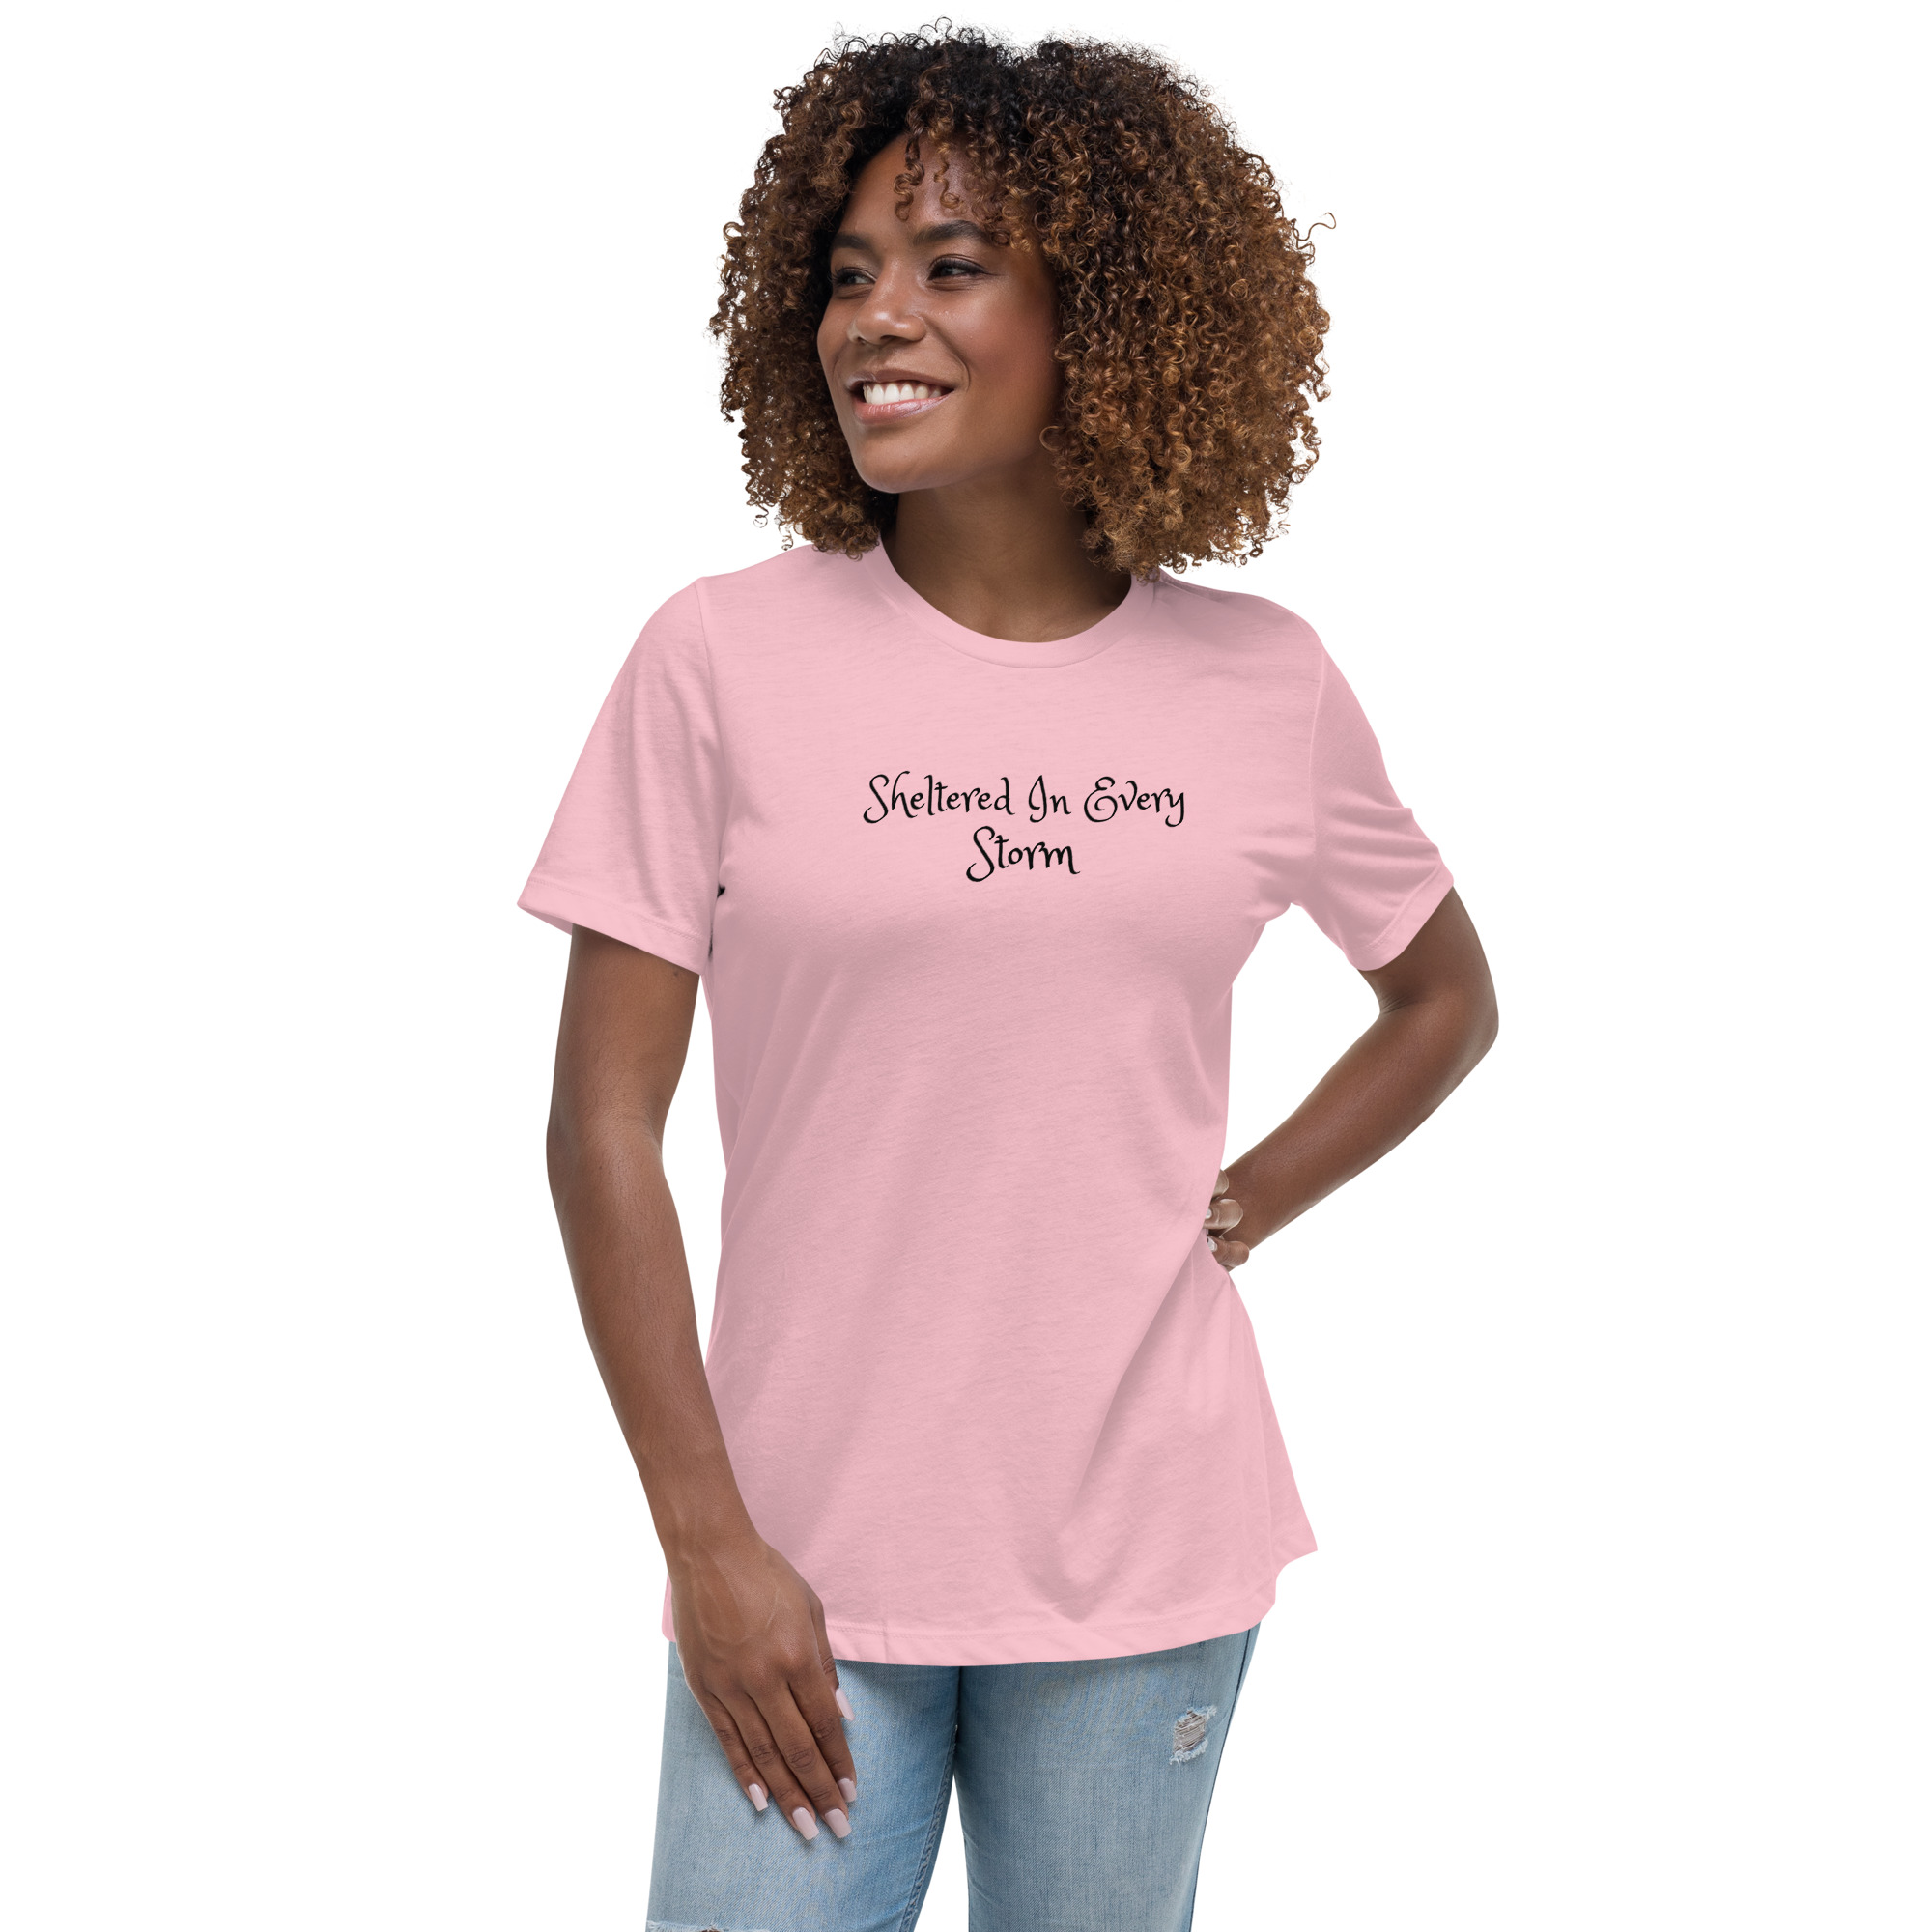 womens-relaxed-t-shirt-pink-front-63227a7661c59.jpg